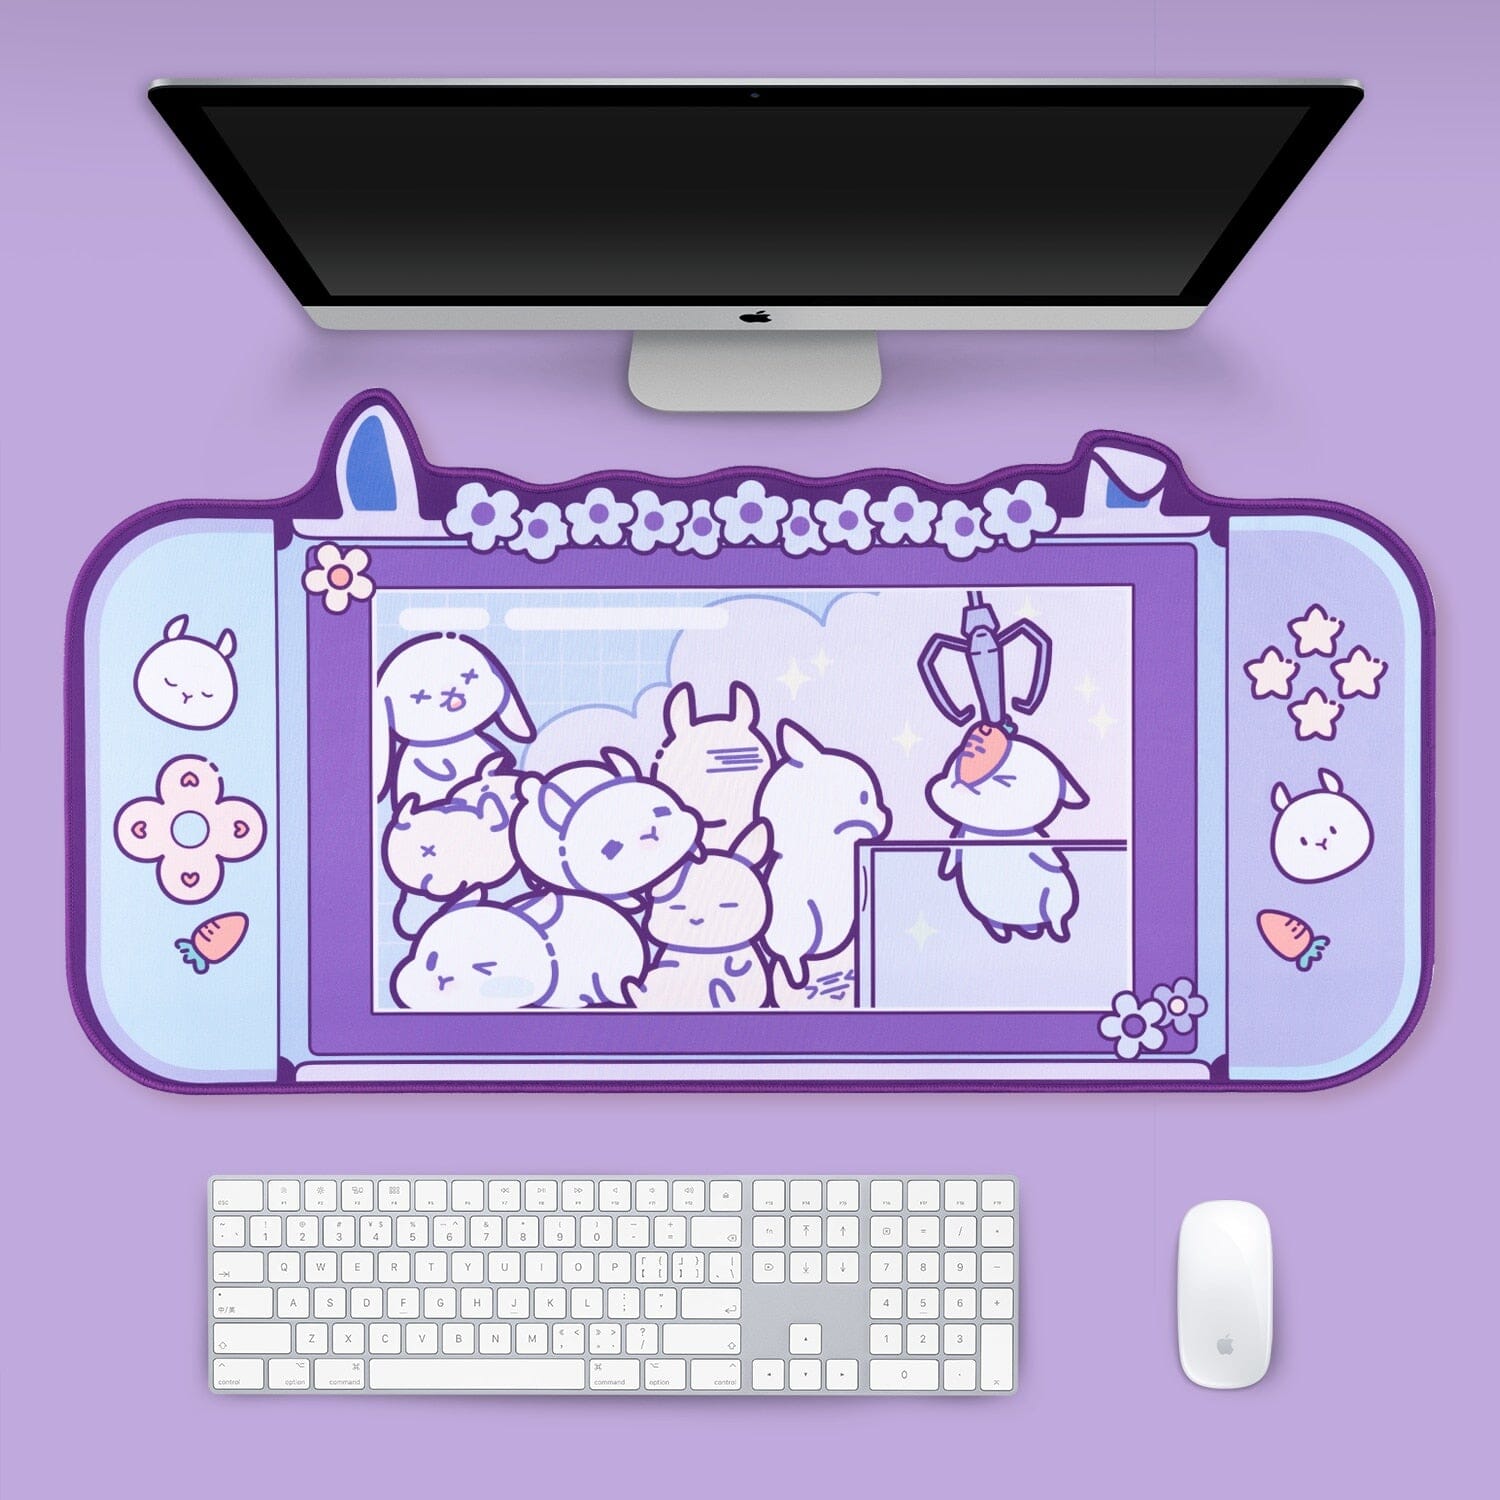 Kawaii Rabbit Trap Gaming Mouse Pad 44cm*80cm Super Cute Thickened Office Computer Big Mouse Pad Keyboard pad Wrist Rest Girl 0 GatoGeek Rabbit big mouse pad 